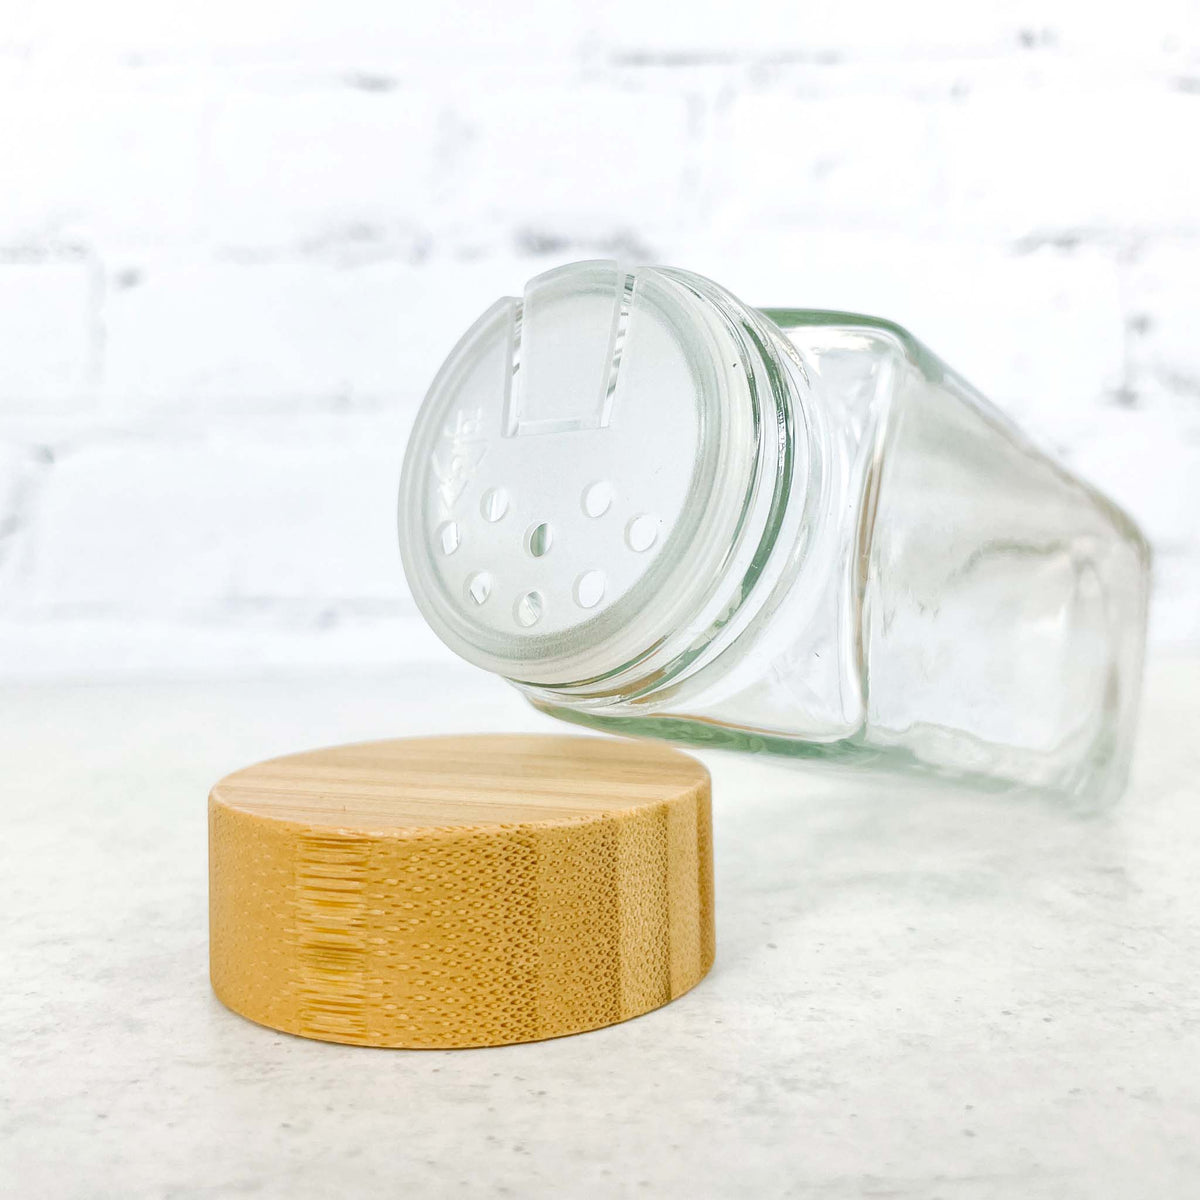 120 ml Shaker Spice Jars with Bamboo Lid